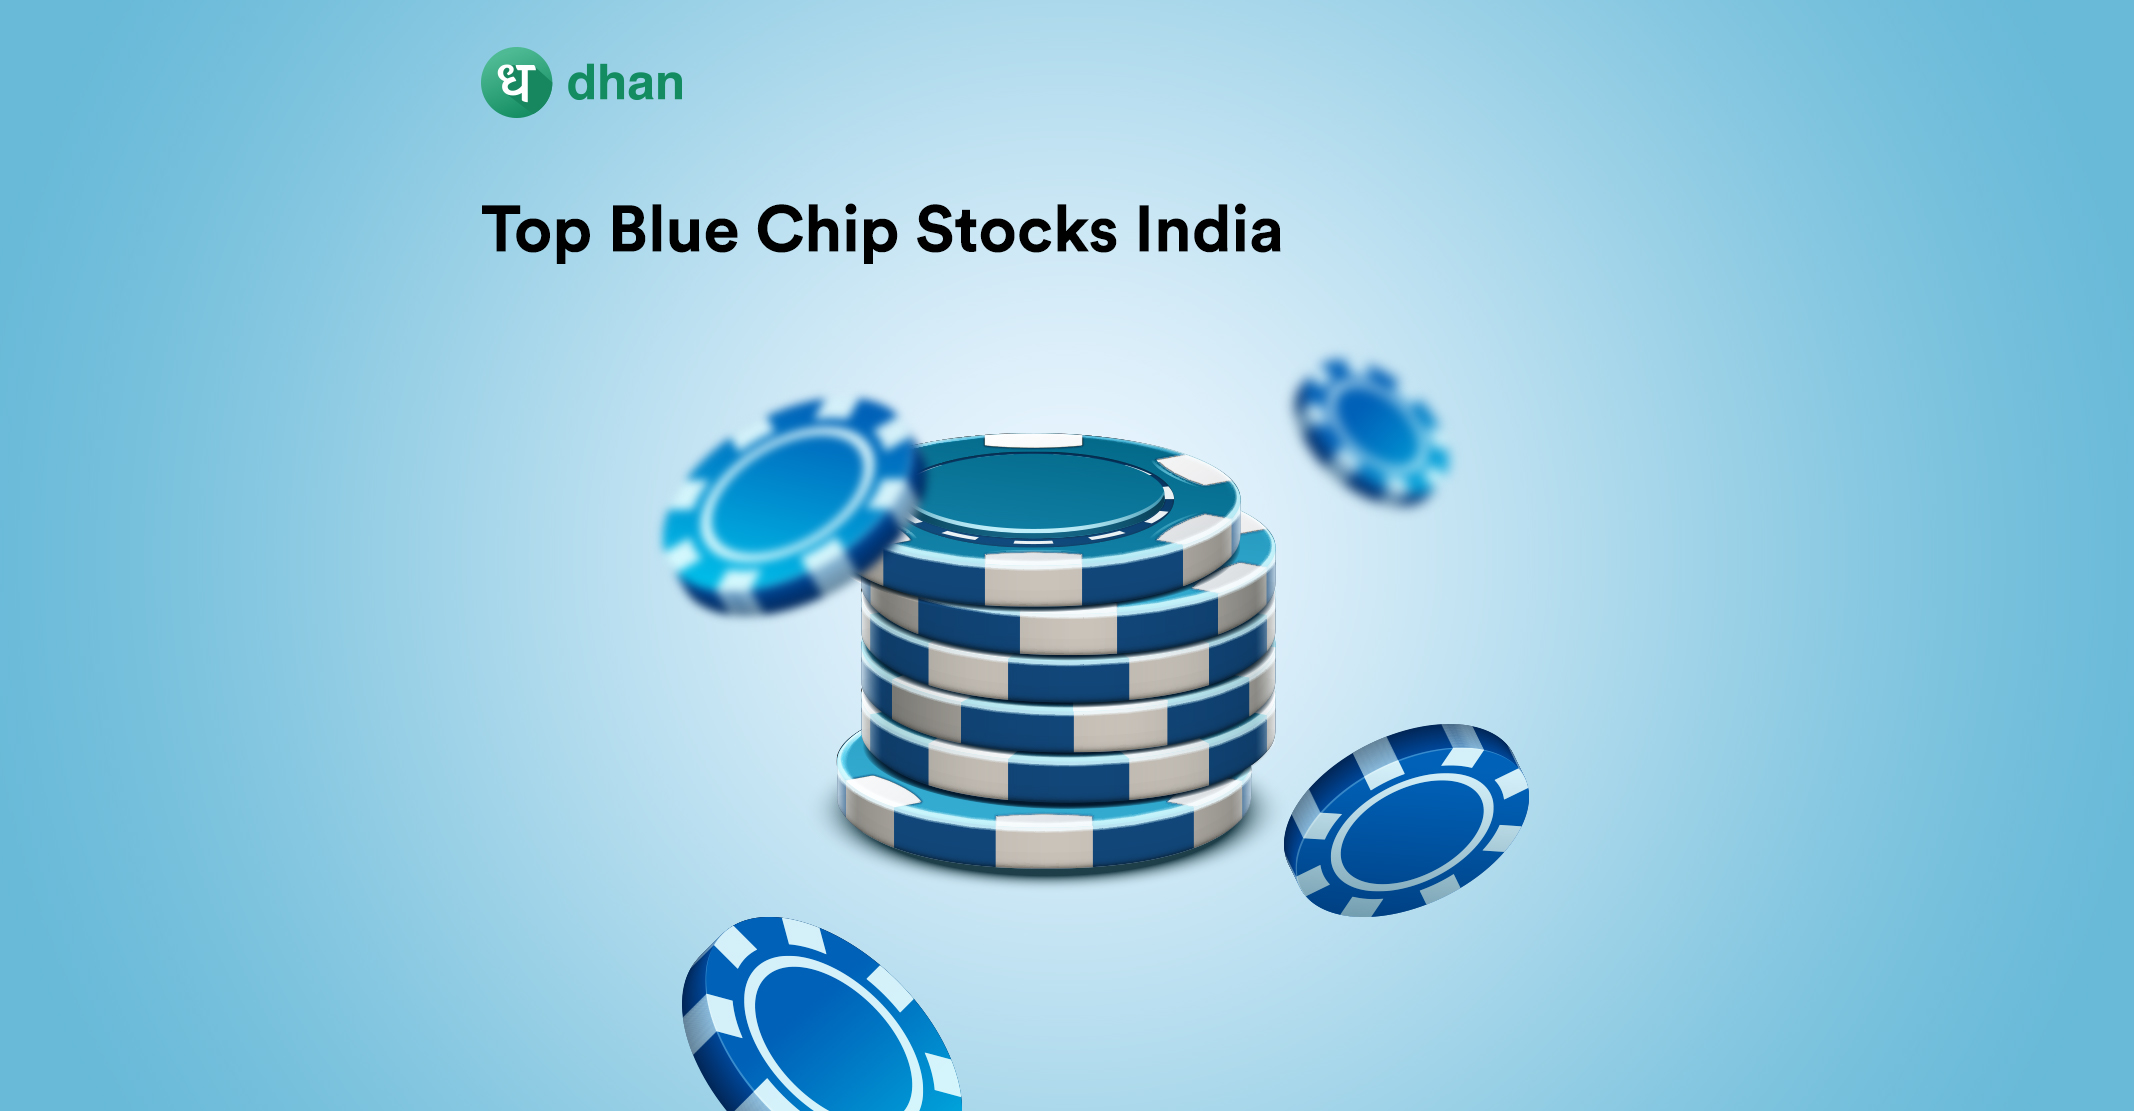 Top Blue Chip Stocks in India